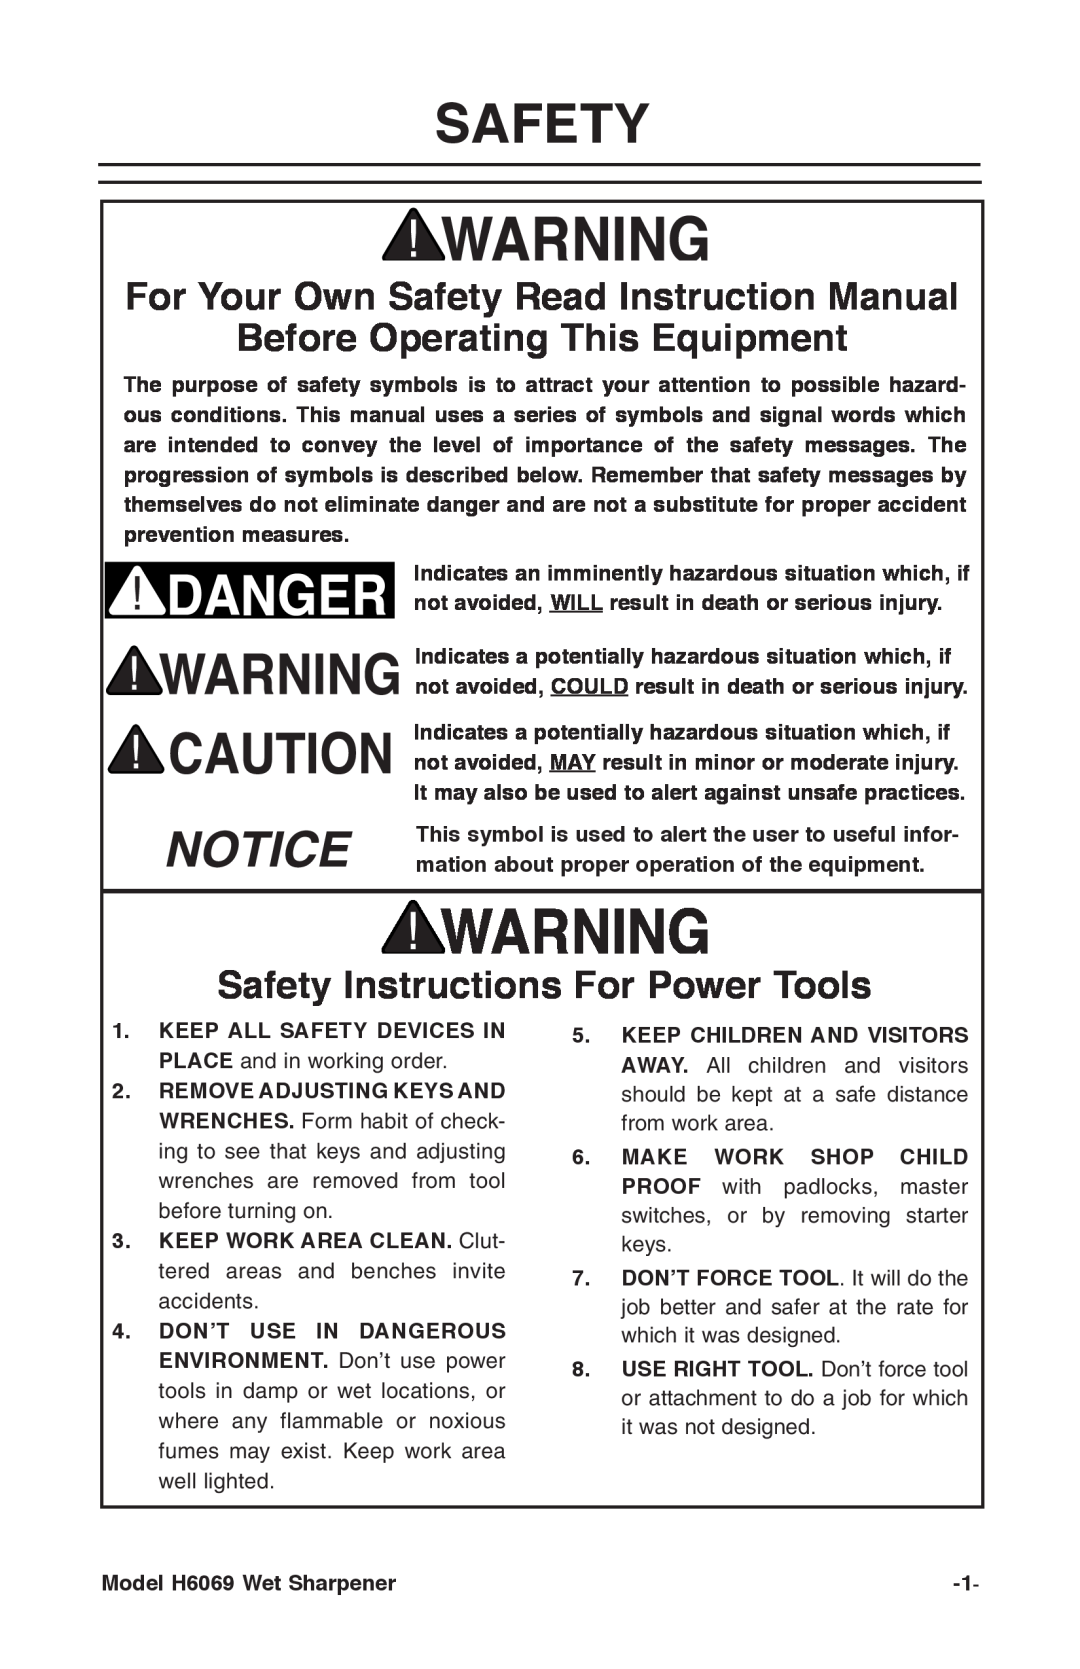 Grizzly Before Operating This Equipment, Safety Instructions For Power Tools, Model H6069 Wet Sharpener 